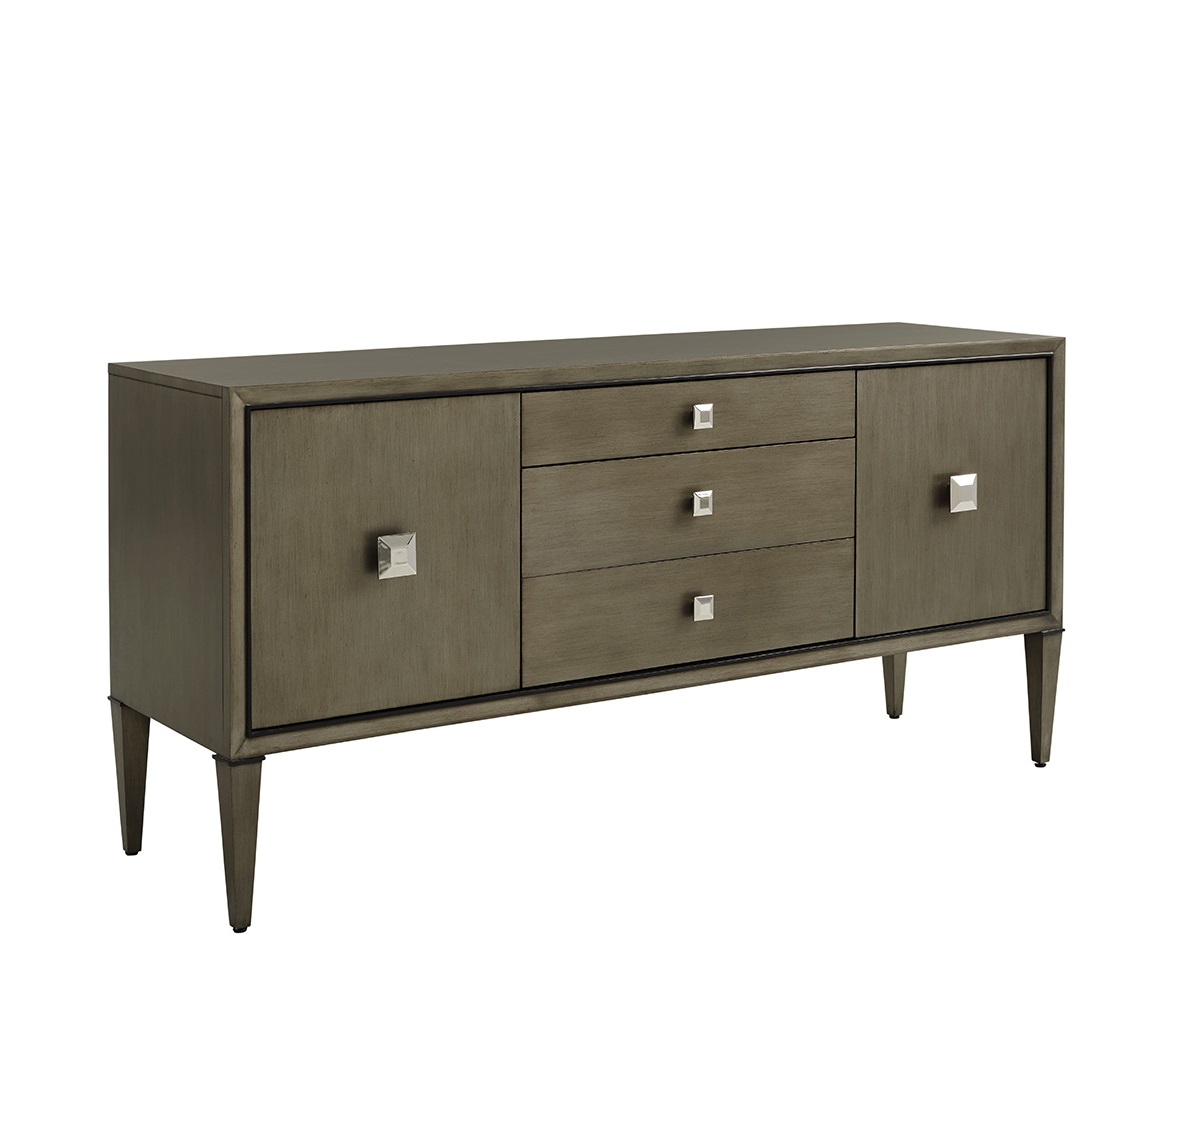 Ariana Provence Sideboard, Lexington Home Brands Sideboard